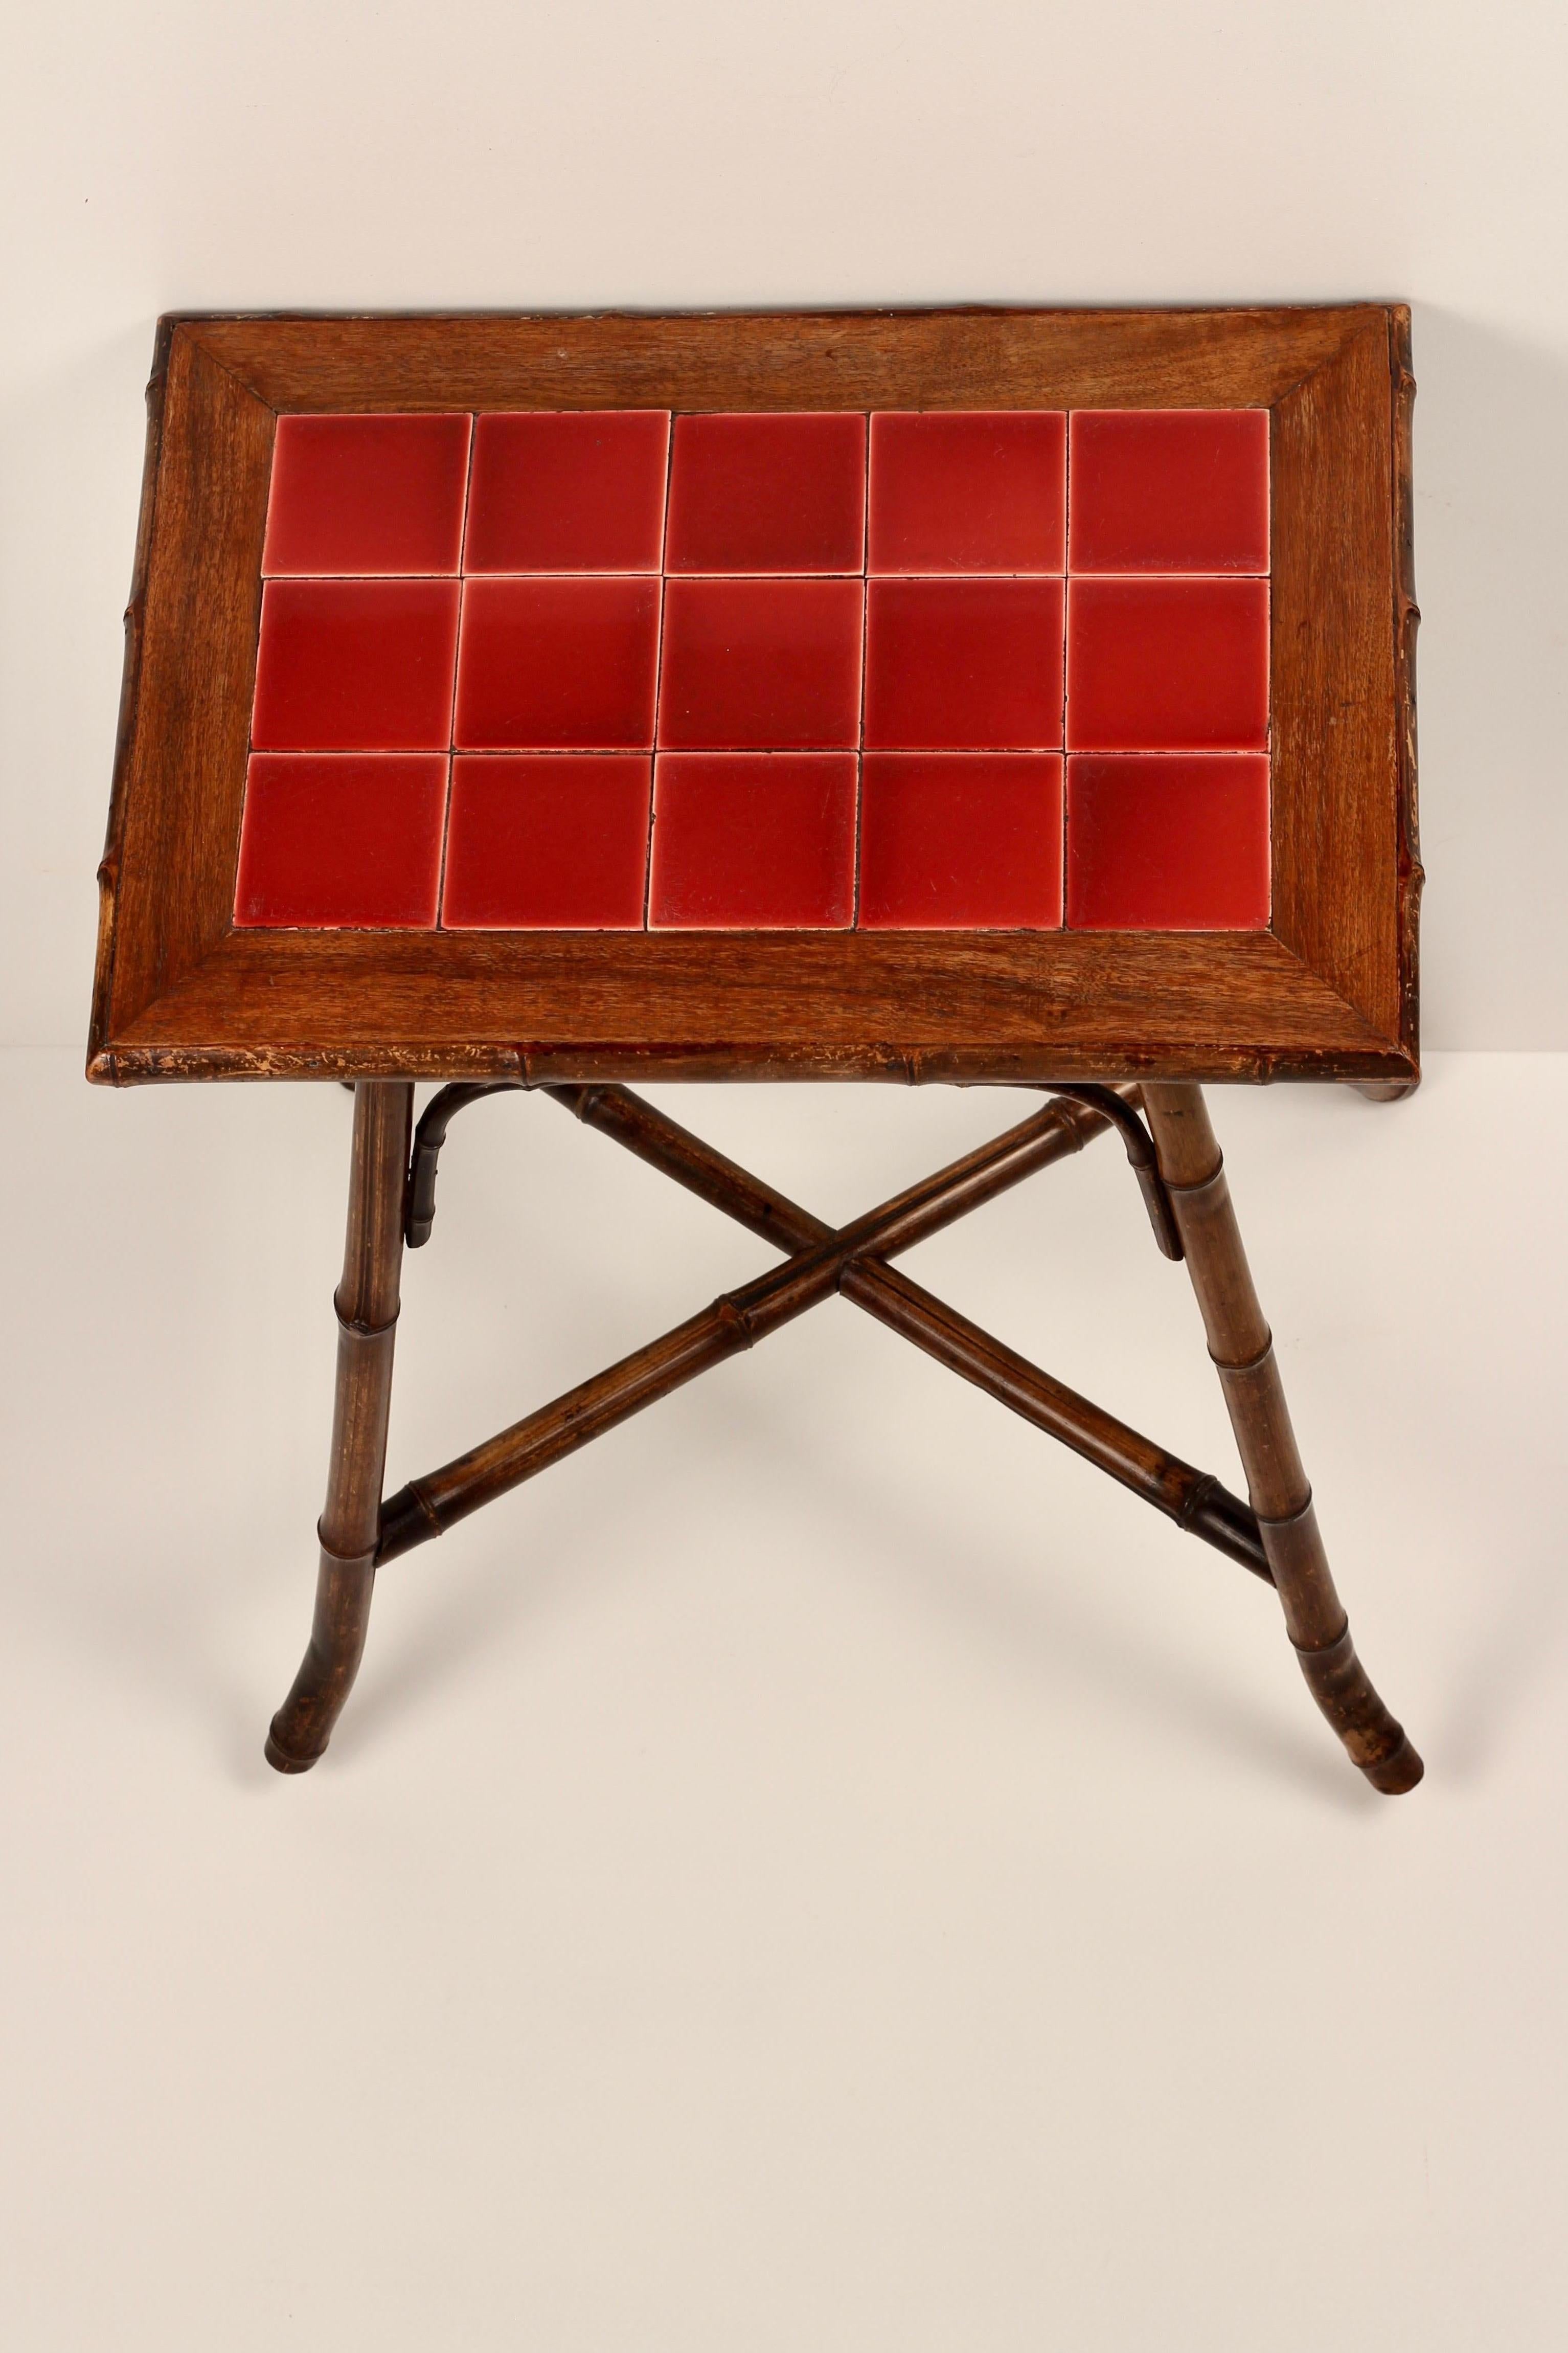 Boho Chic Steam Bent Bamboo Side Table with Deep Red Ceramic Tiled Top 1890’s For Sale 3